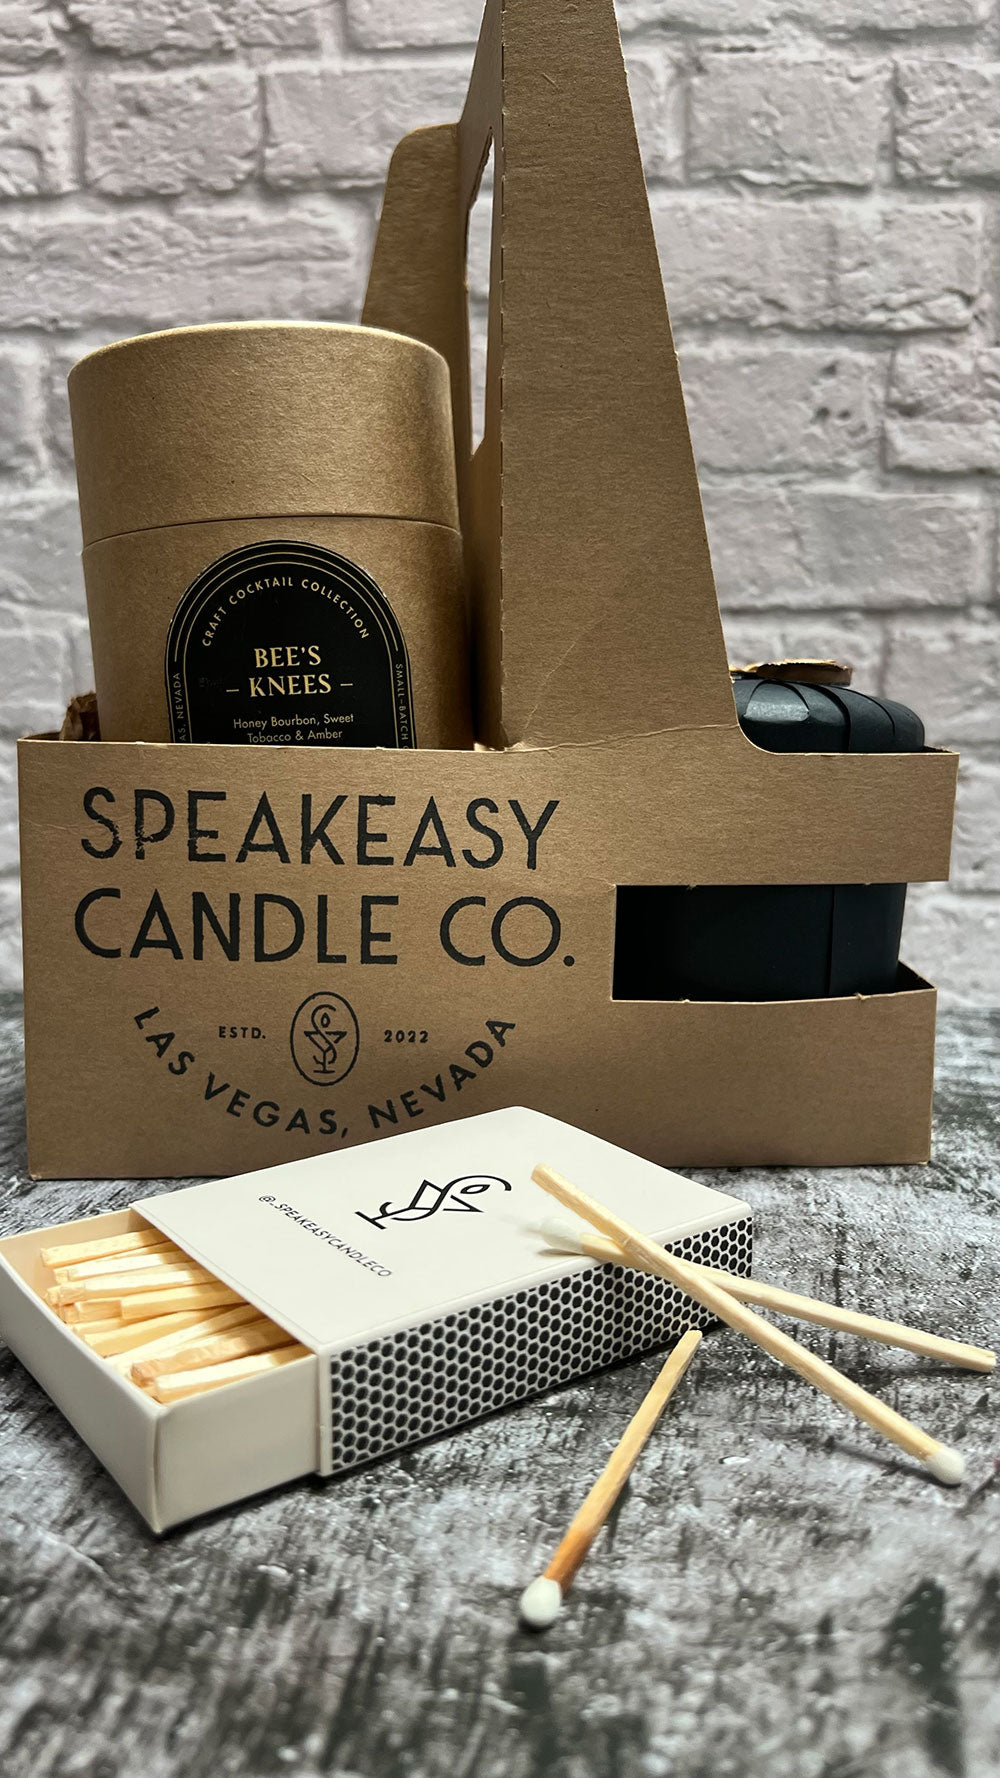 Top Shelf Gift Set (2 candles and matches)